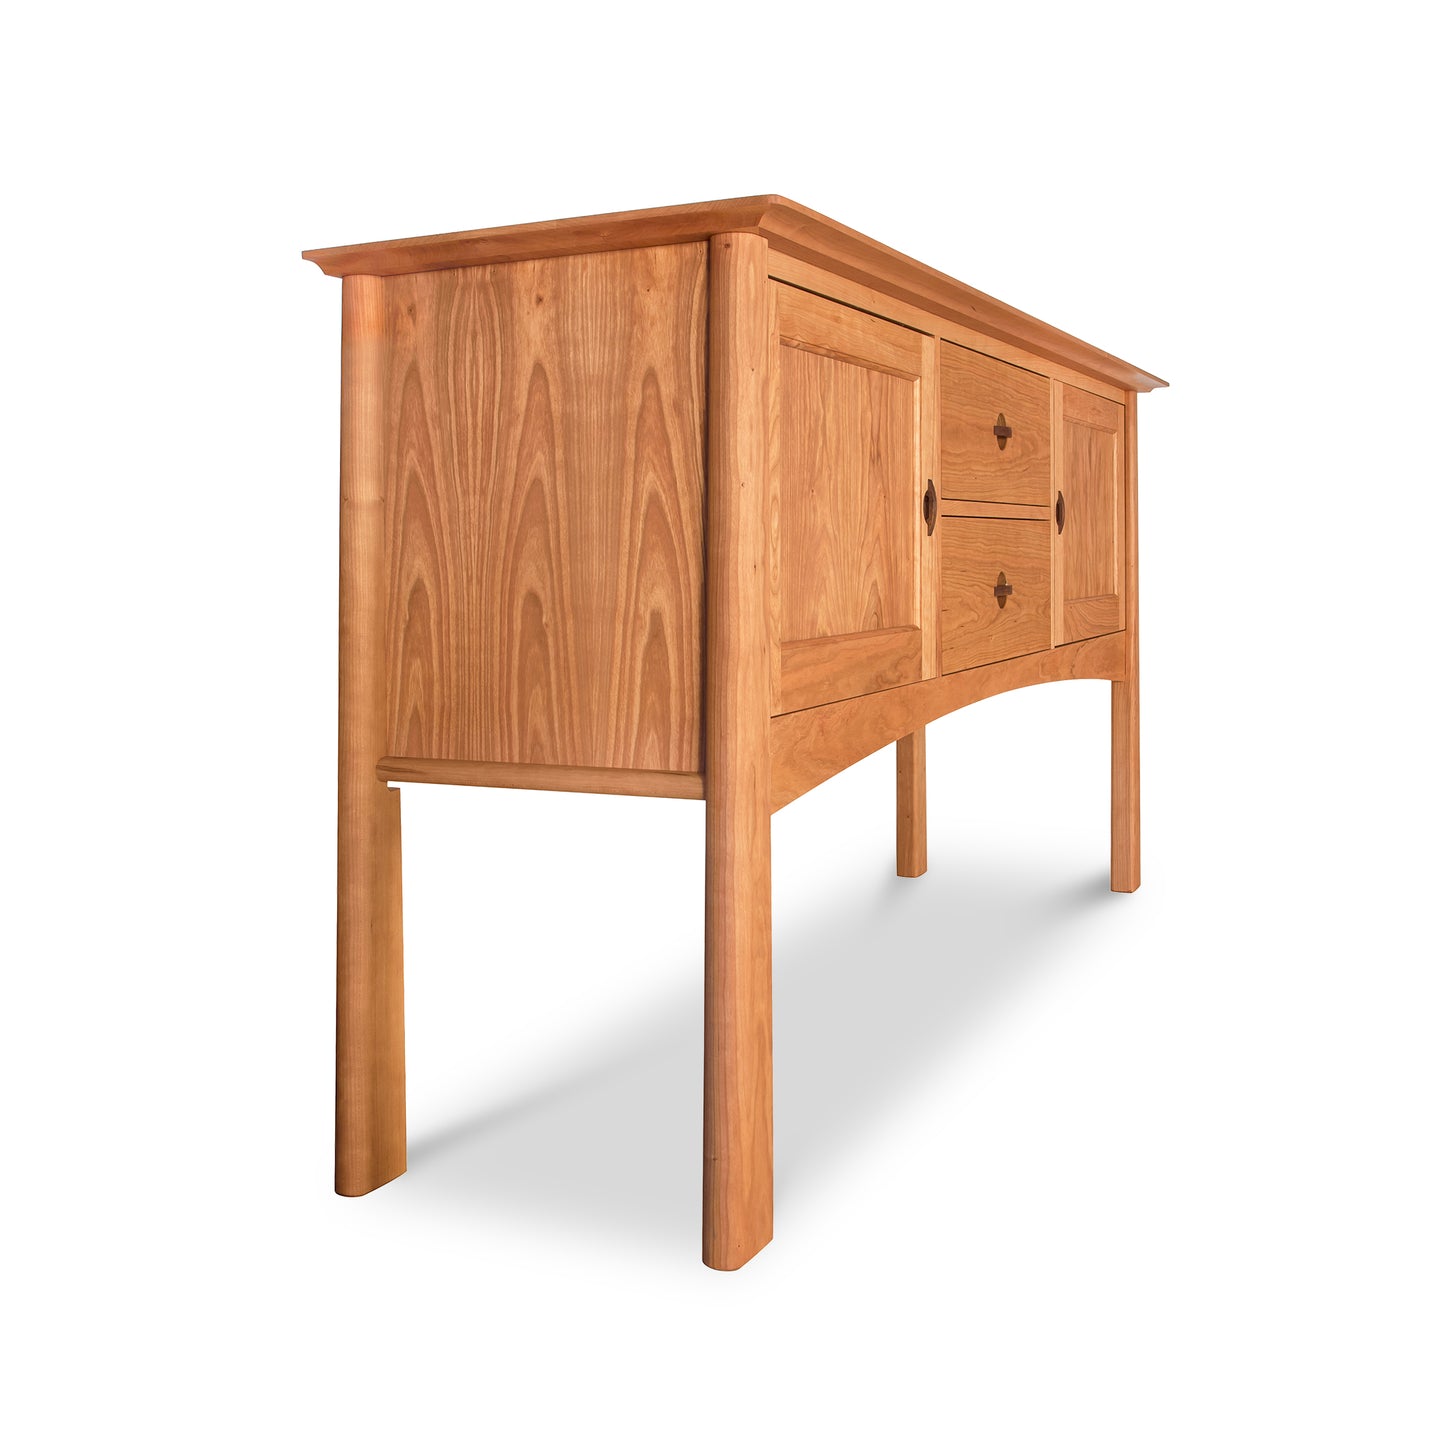 A Maple Corner Woodworks Cherry Moon Huntboard, crafted from natural hardwoods with a smooth finish featuring two doors and star-shaped knobs, set against a plain white background.